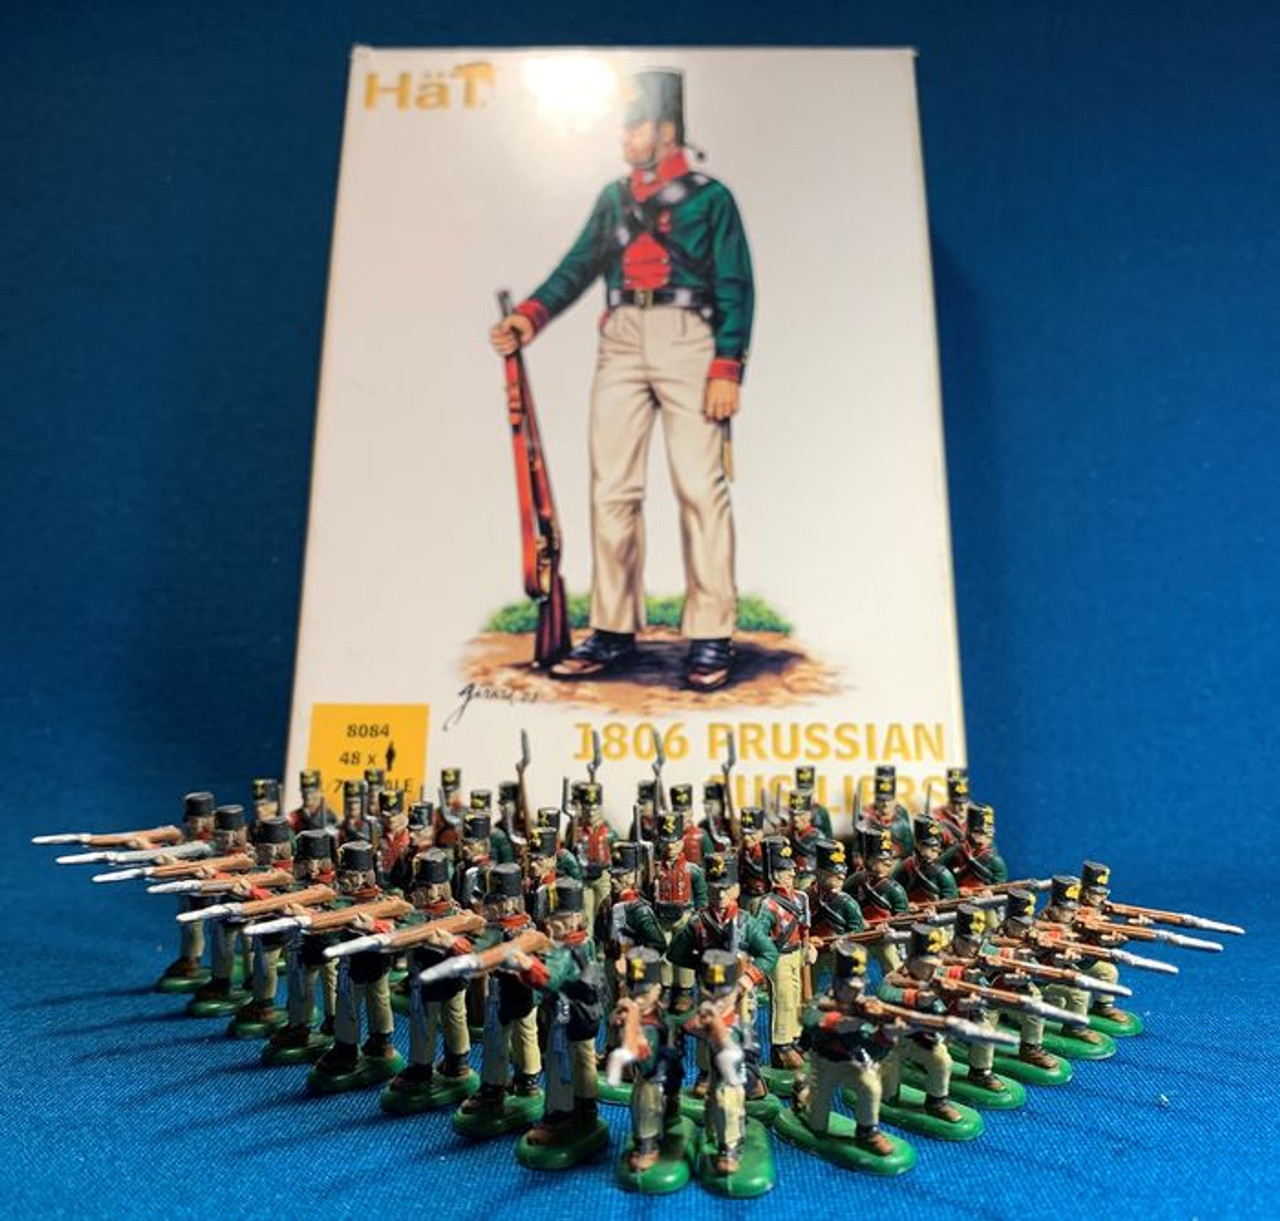 HaT 8084 Napoleonic 1806 Prussian Fusiliers 1:72 S